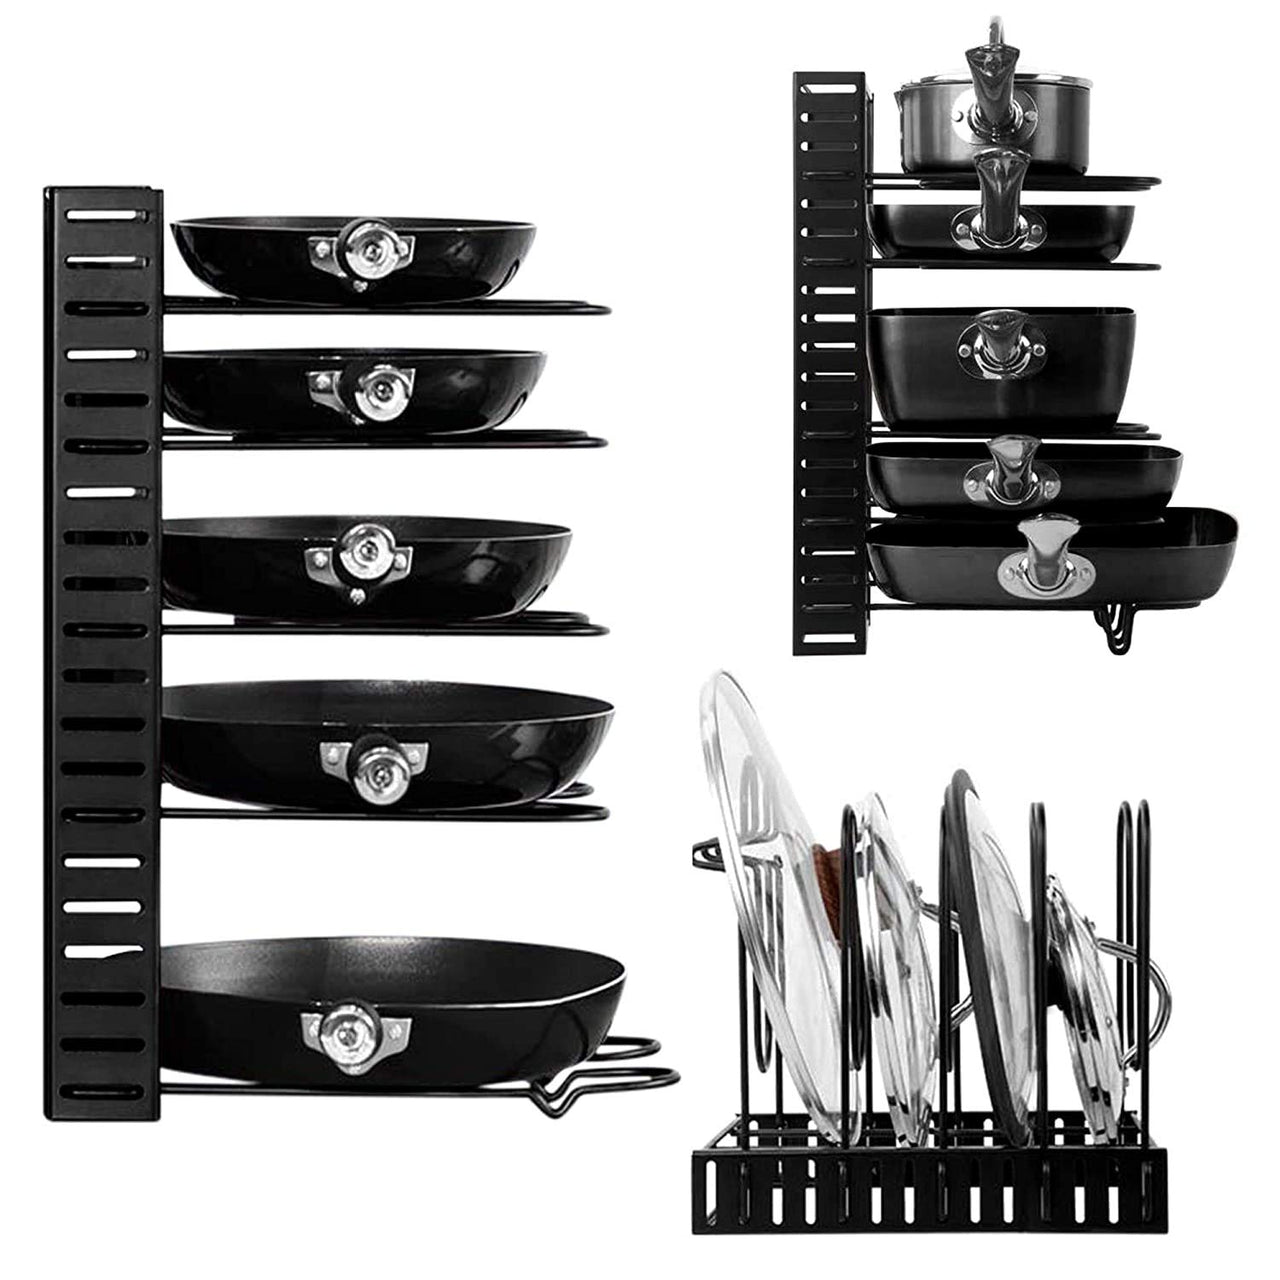 Pot Rack Organizer Kitchen Organizer, 8 & 5 Tiers Adjustable Pots And Pans Organizer, Large Pot Lid Holders Pan Rack For Kitchen Cabinet Counter Dime Store